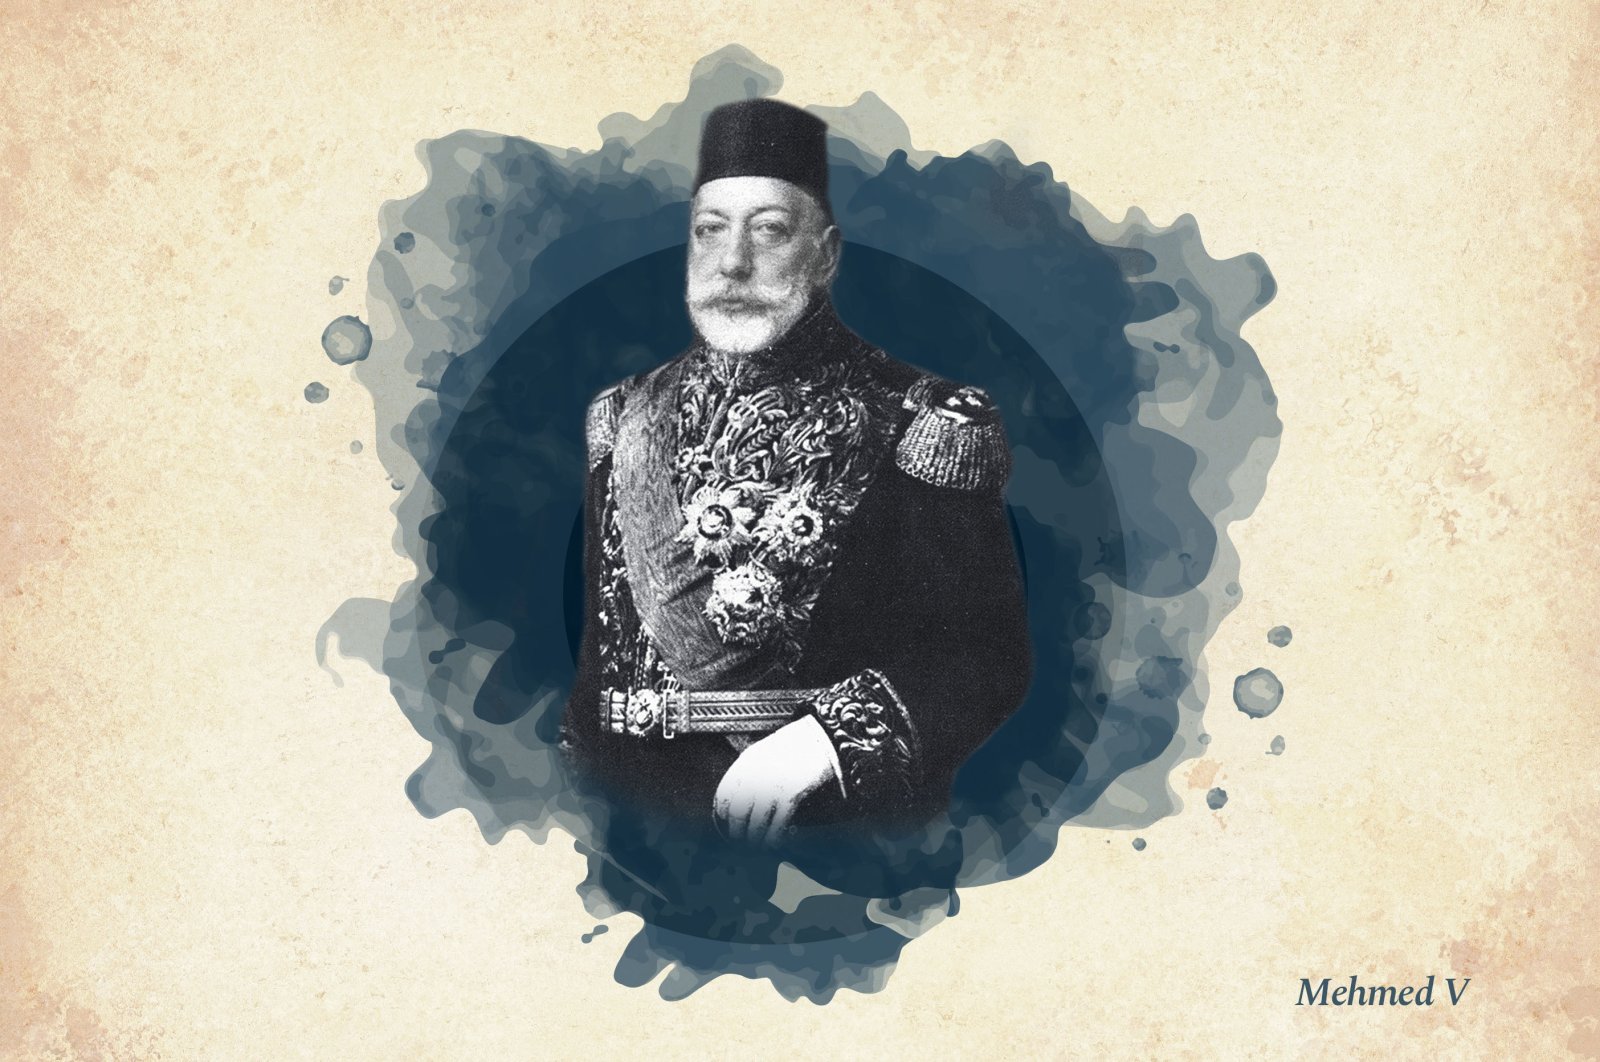 This old photograph shows Sultan Mehmed V, the 35th ruler of the Ottoman Empire. (Wikimedia / Edited by Büşra Öztürk)